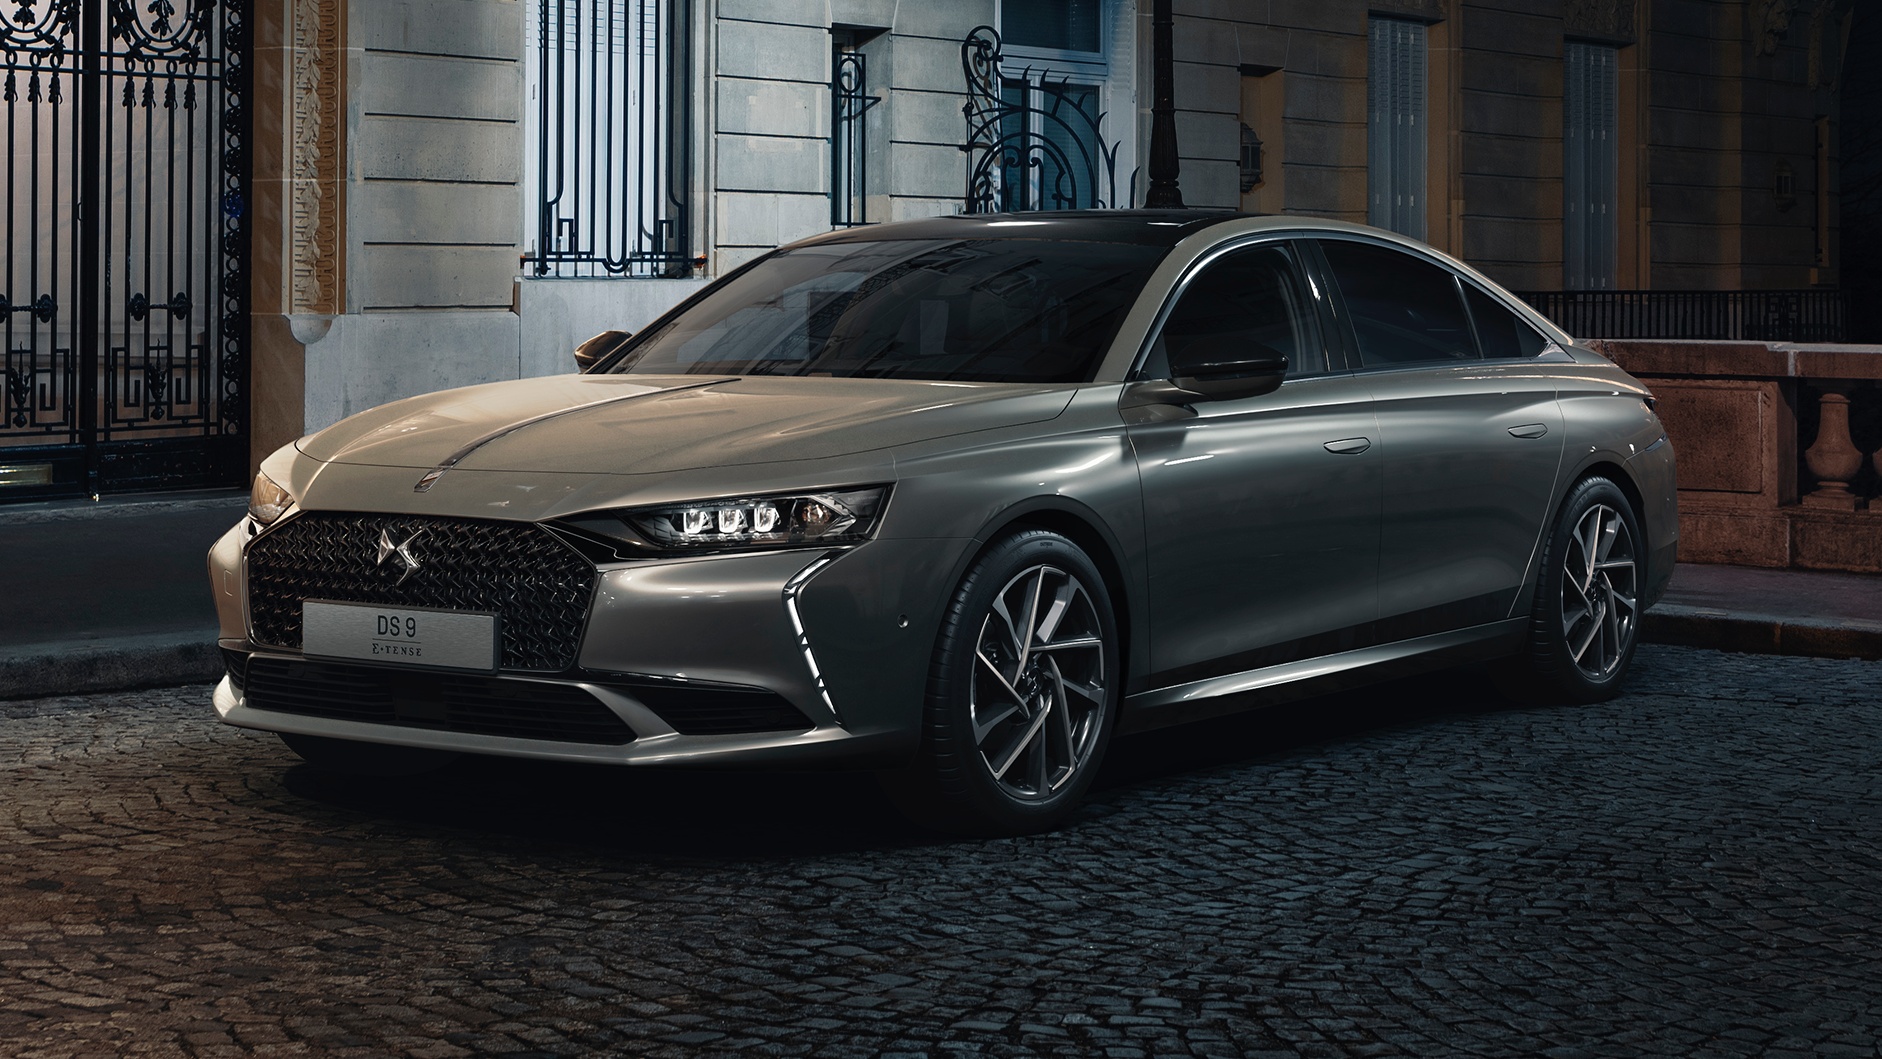 news-ds9-flagship-saloon-revealed-plug-in-hybrid-meets-french-luxury